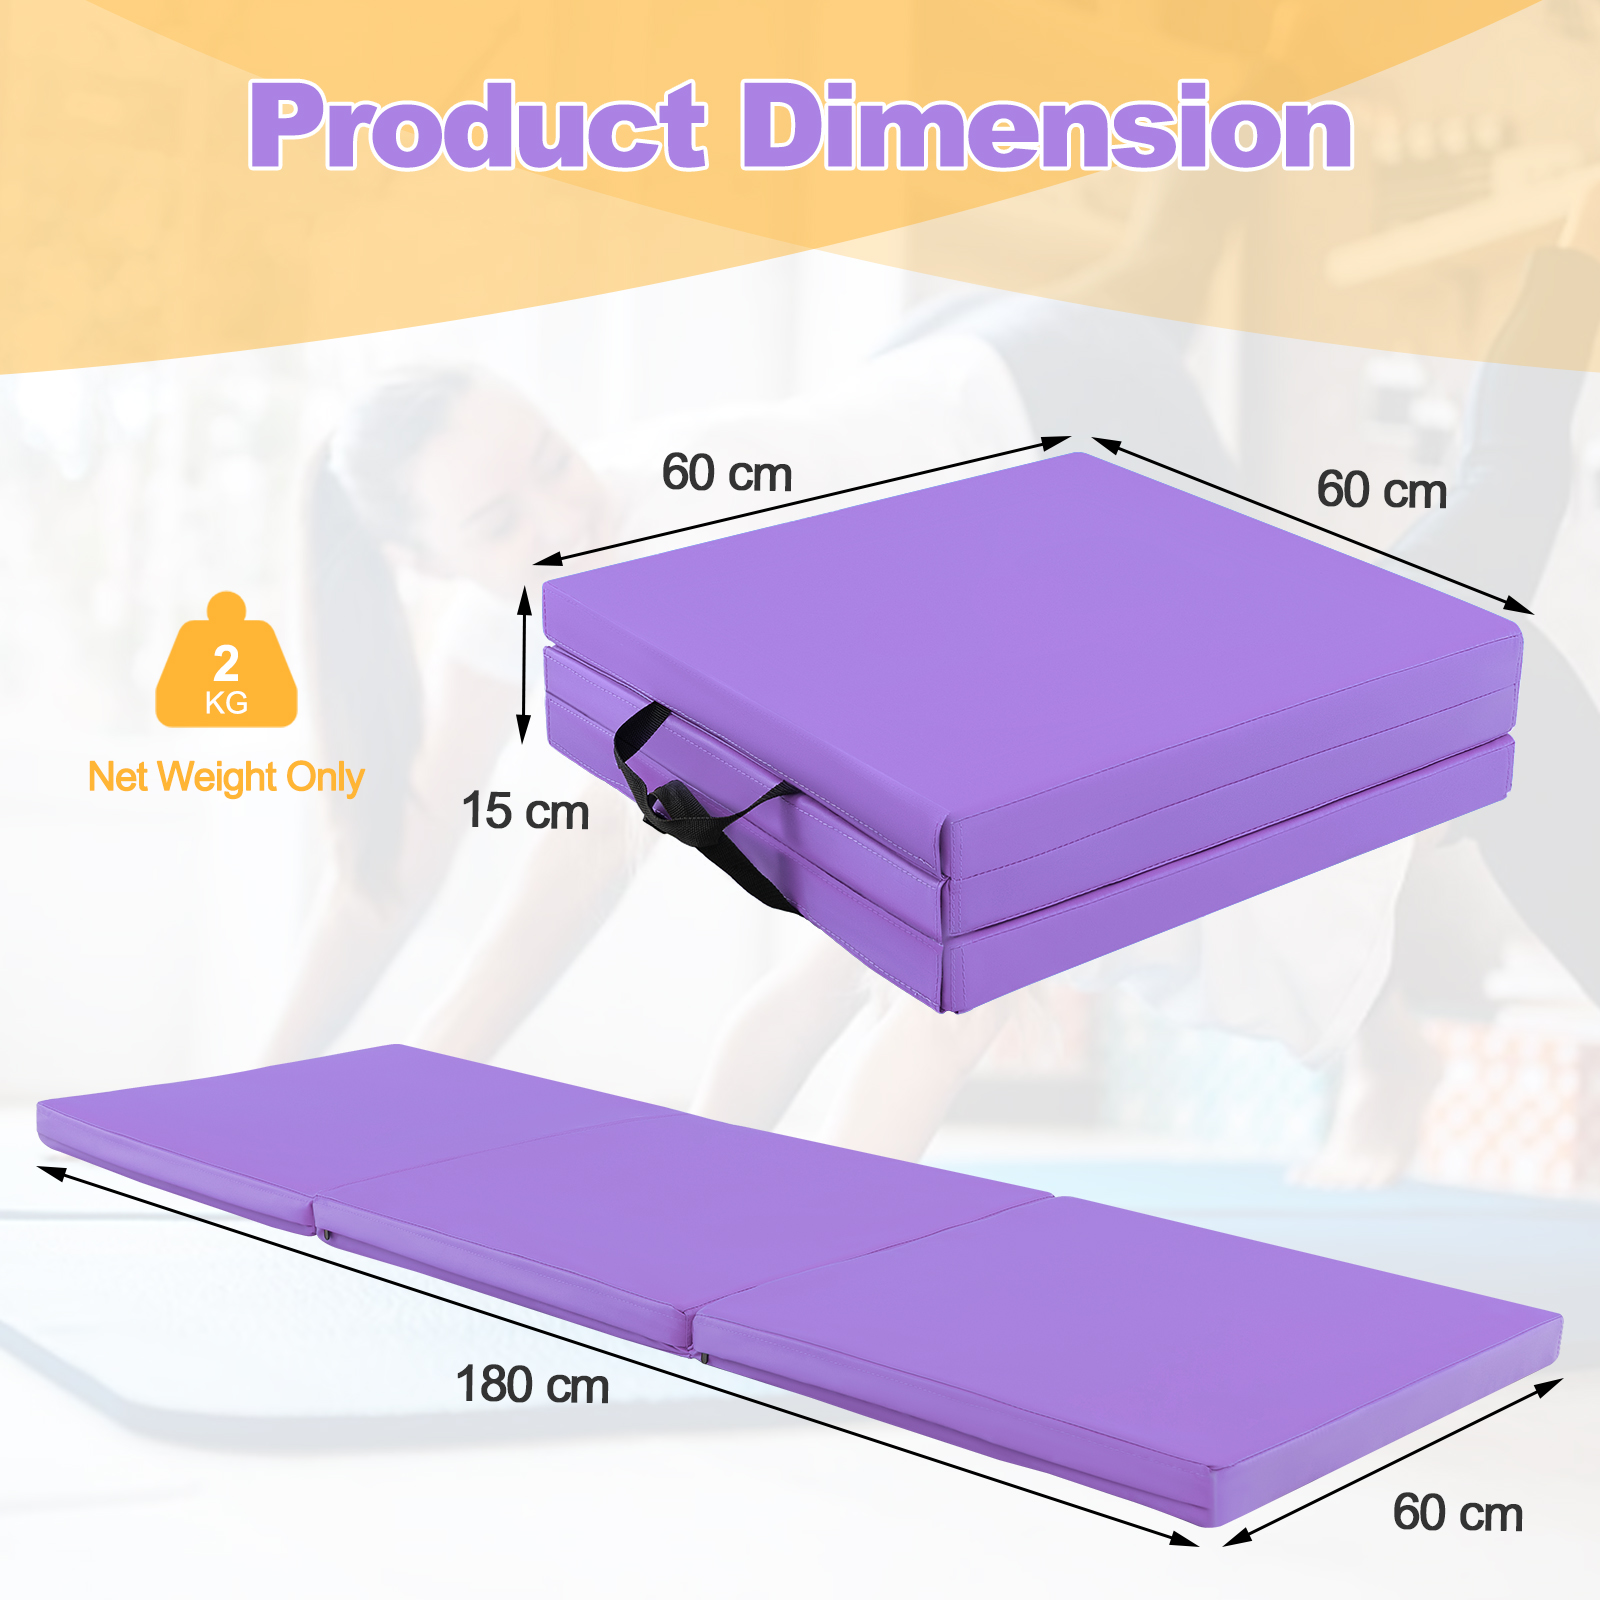 Tri_Fold_Folding_Exercise_Mat_with_PU_Leather_Cover_Purple-4.jpg